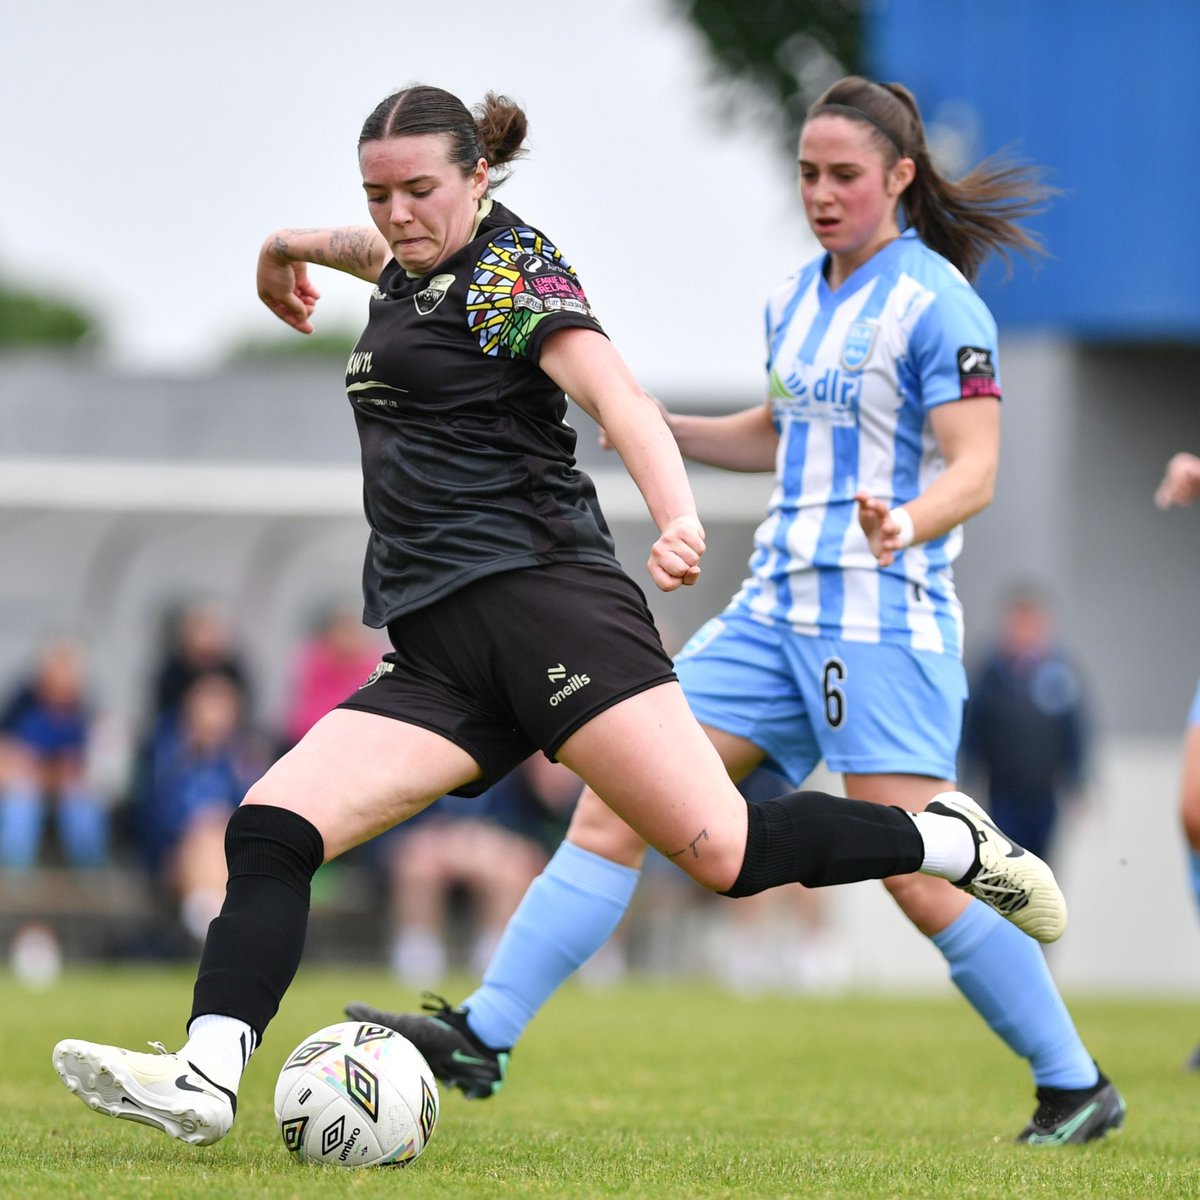 𝗙𝗶𝗿𝘀𝘁 𝗦𝘁𝗮𝗿𝘁 ✅ 𝗙𝗶𝗿𝘀𝘁 𝗚𝗼𝗮𝗹 ✅ A big impact from Stefanie Young who's strike yesterday guaranteed us an All-Island Cup Quarter Final 🤝 Next up is league action away to Wexford FC on Saturday at 6PM 👊 📸 @mickoshea100